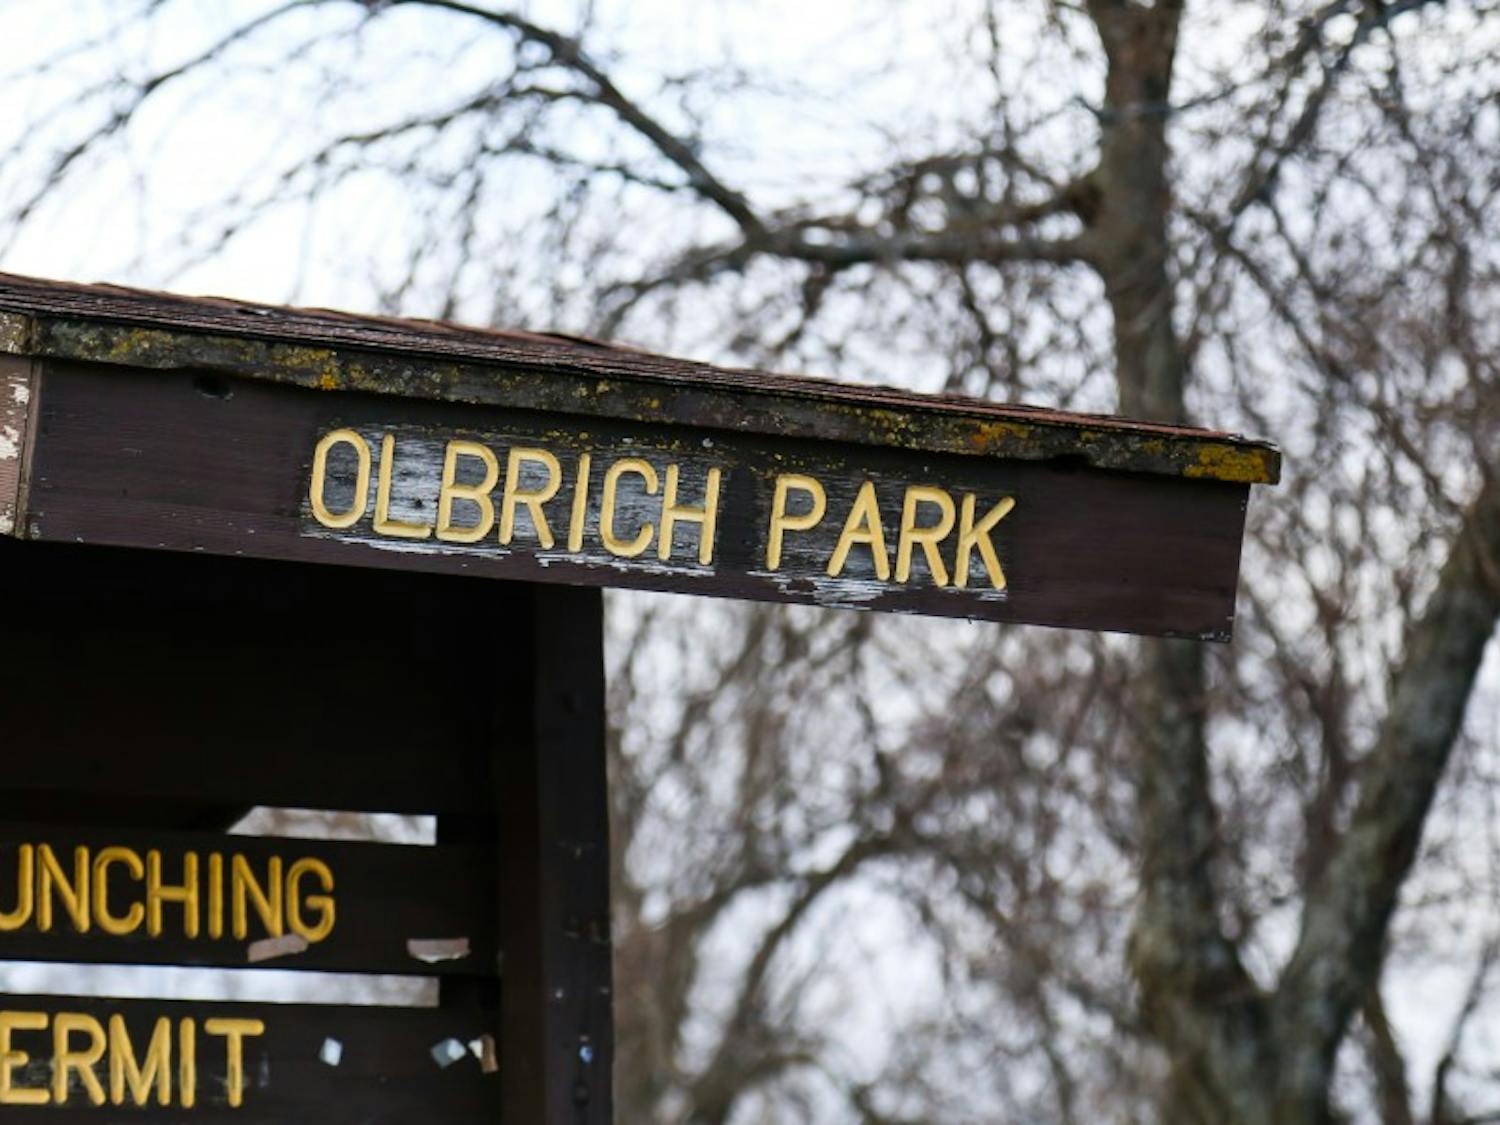 In May, Olbrich park will likely gain a new addition: an outdoor alcohol area called “The Biergarten”.